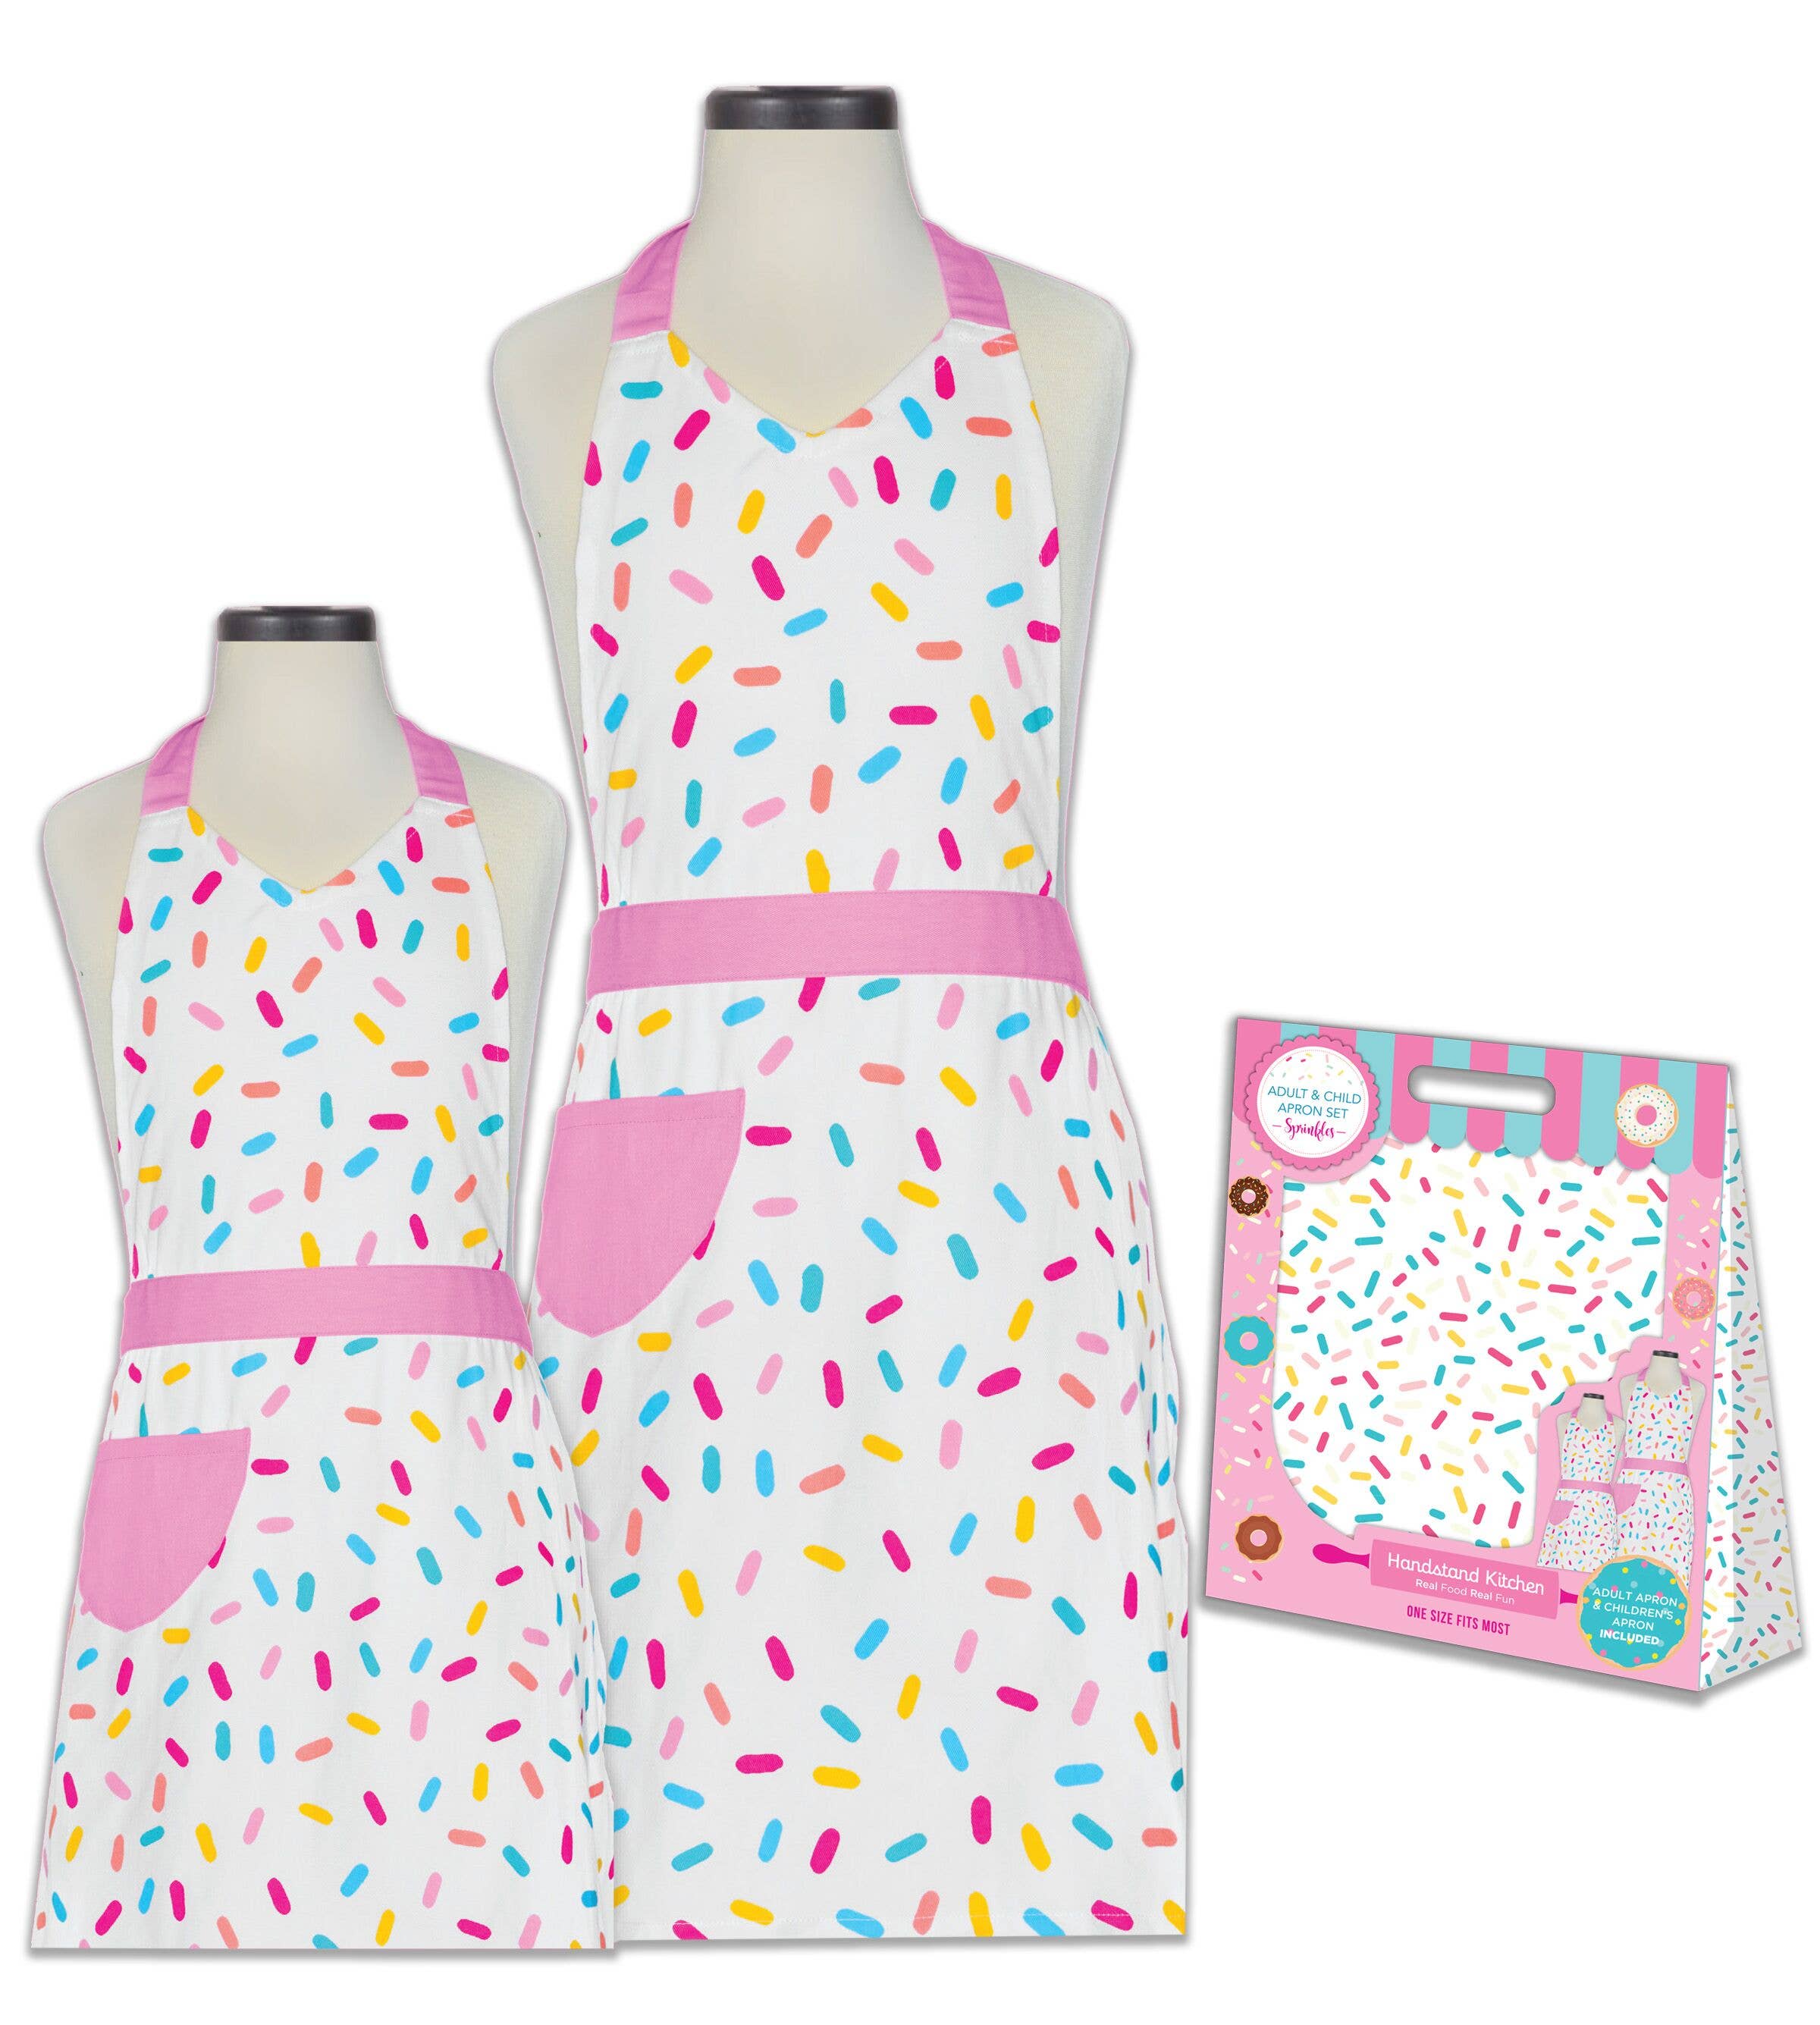 Sprinkles Adult and Child Apron Set